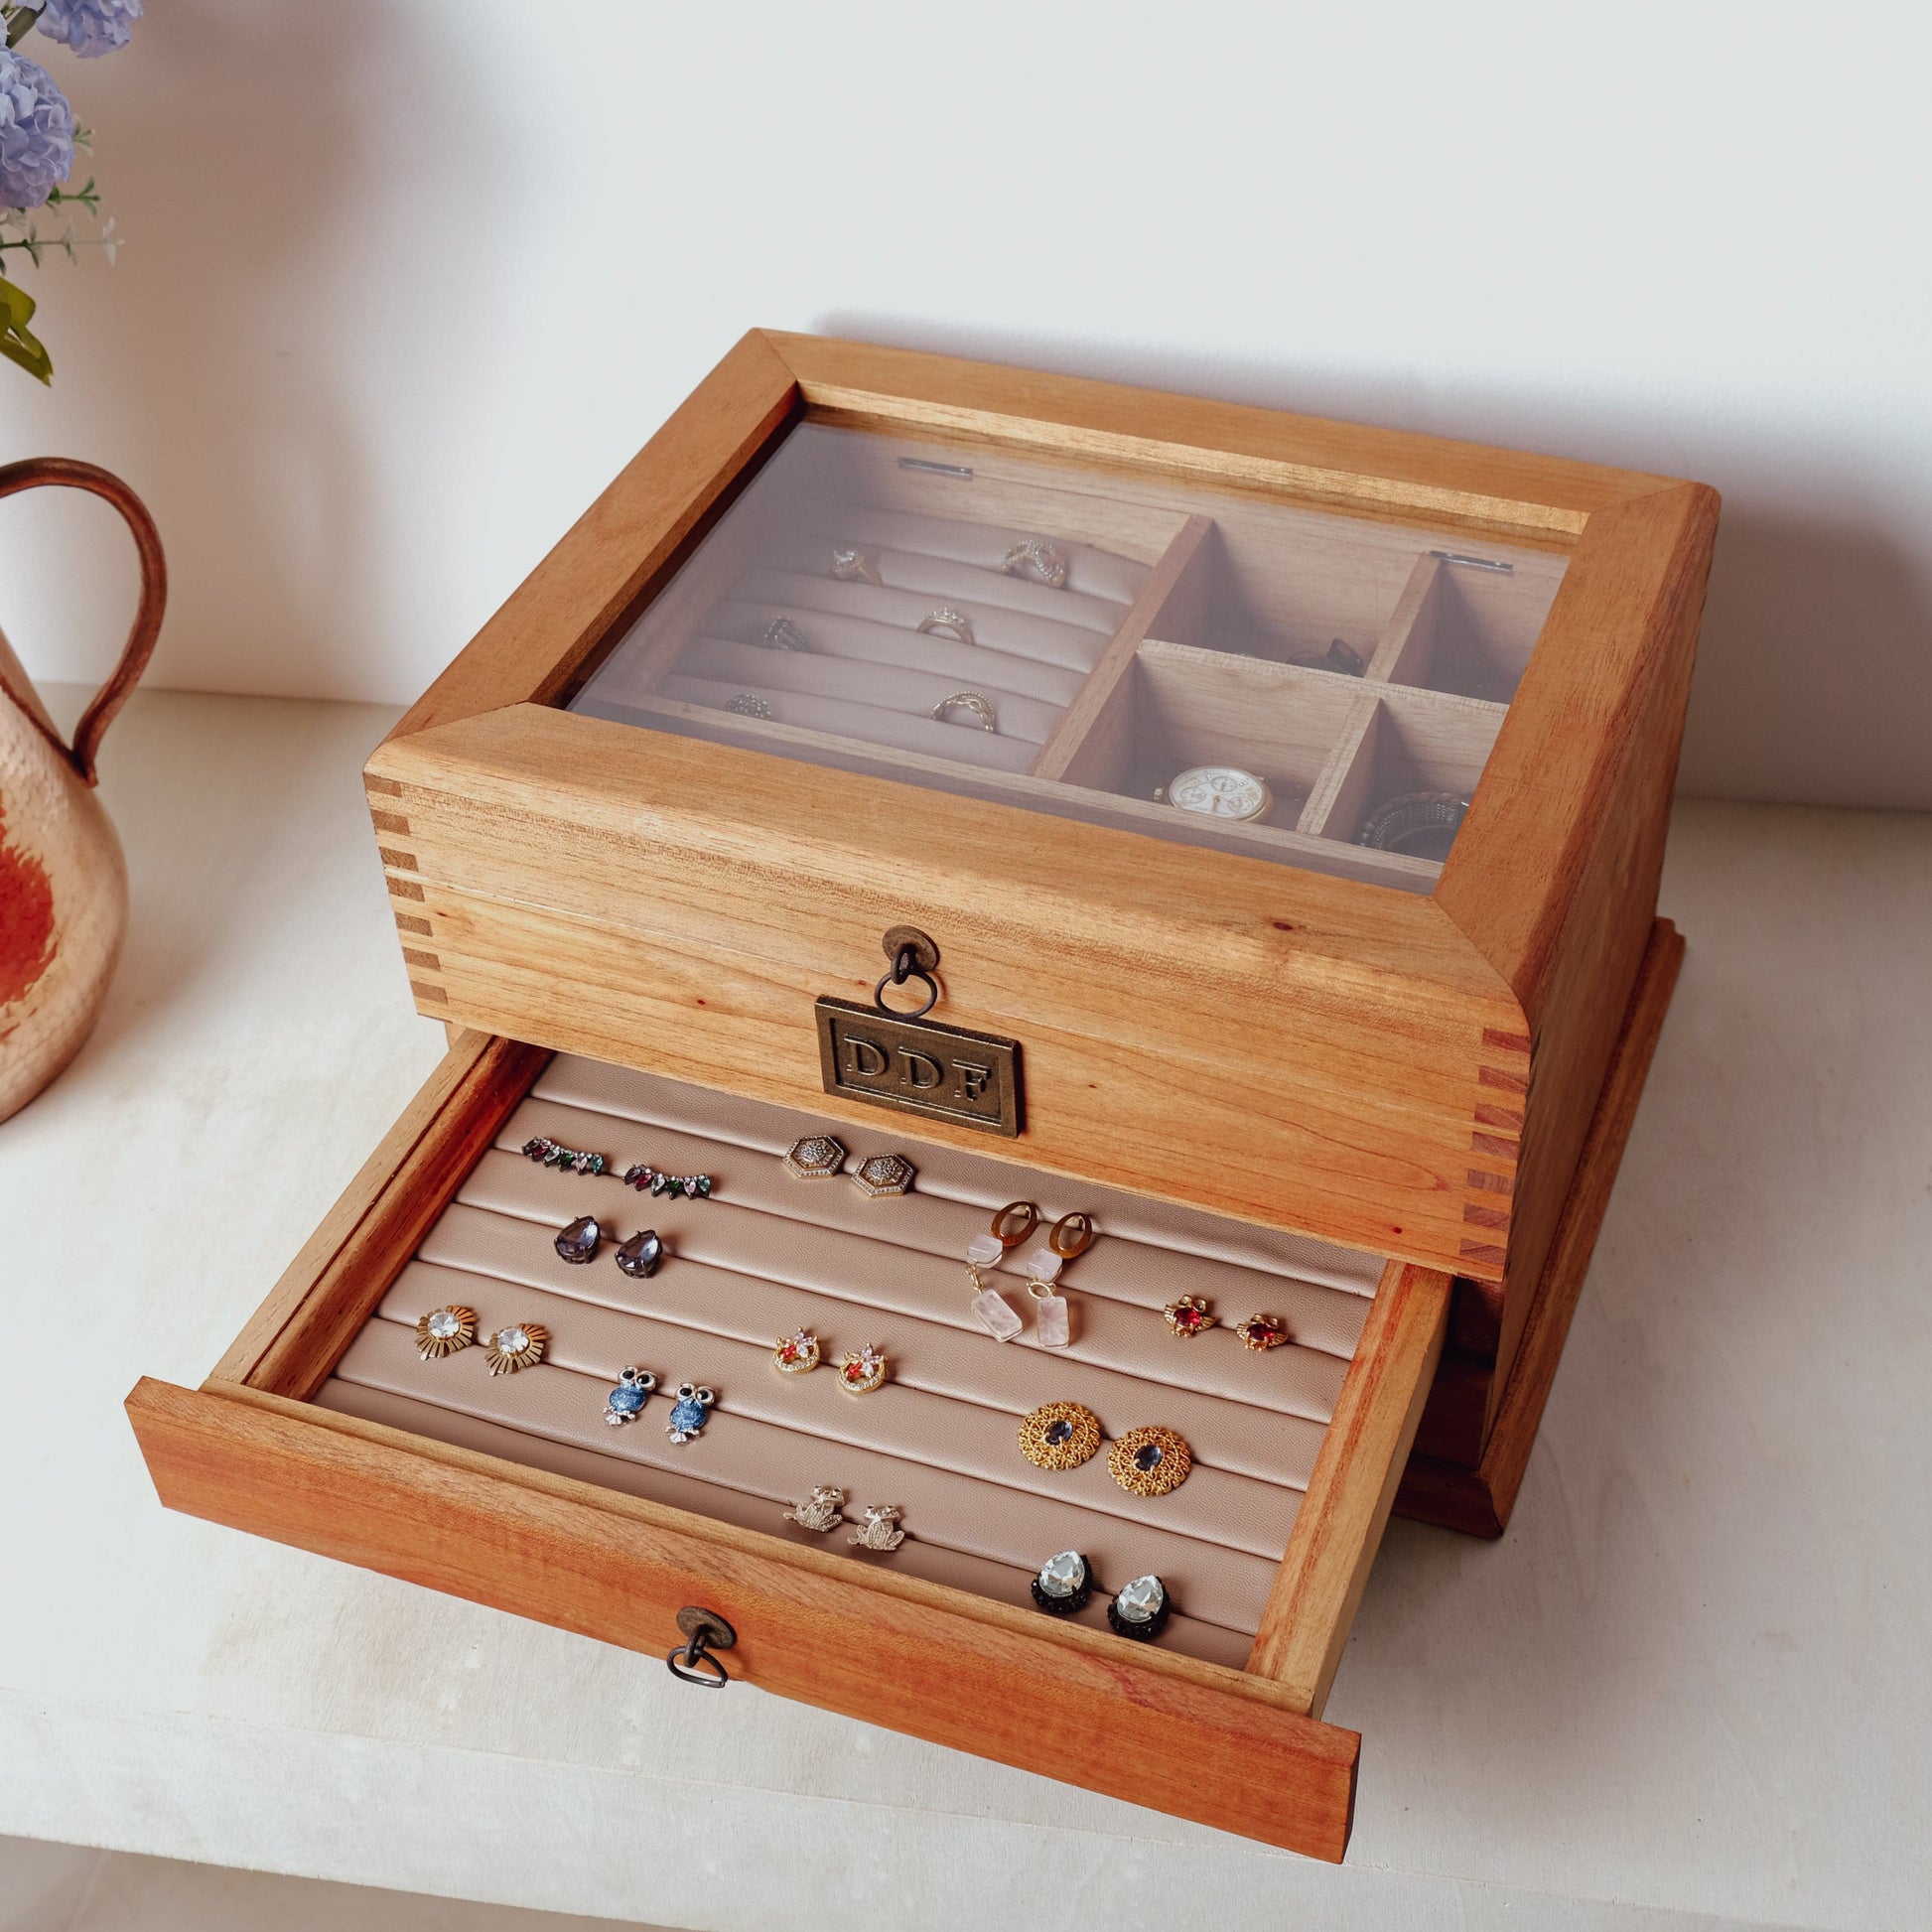 Personalized Cedar Wood Jewelry Box with double drawer